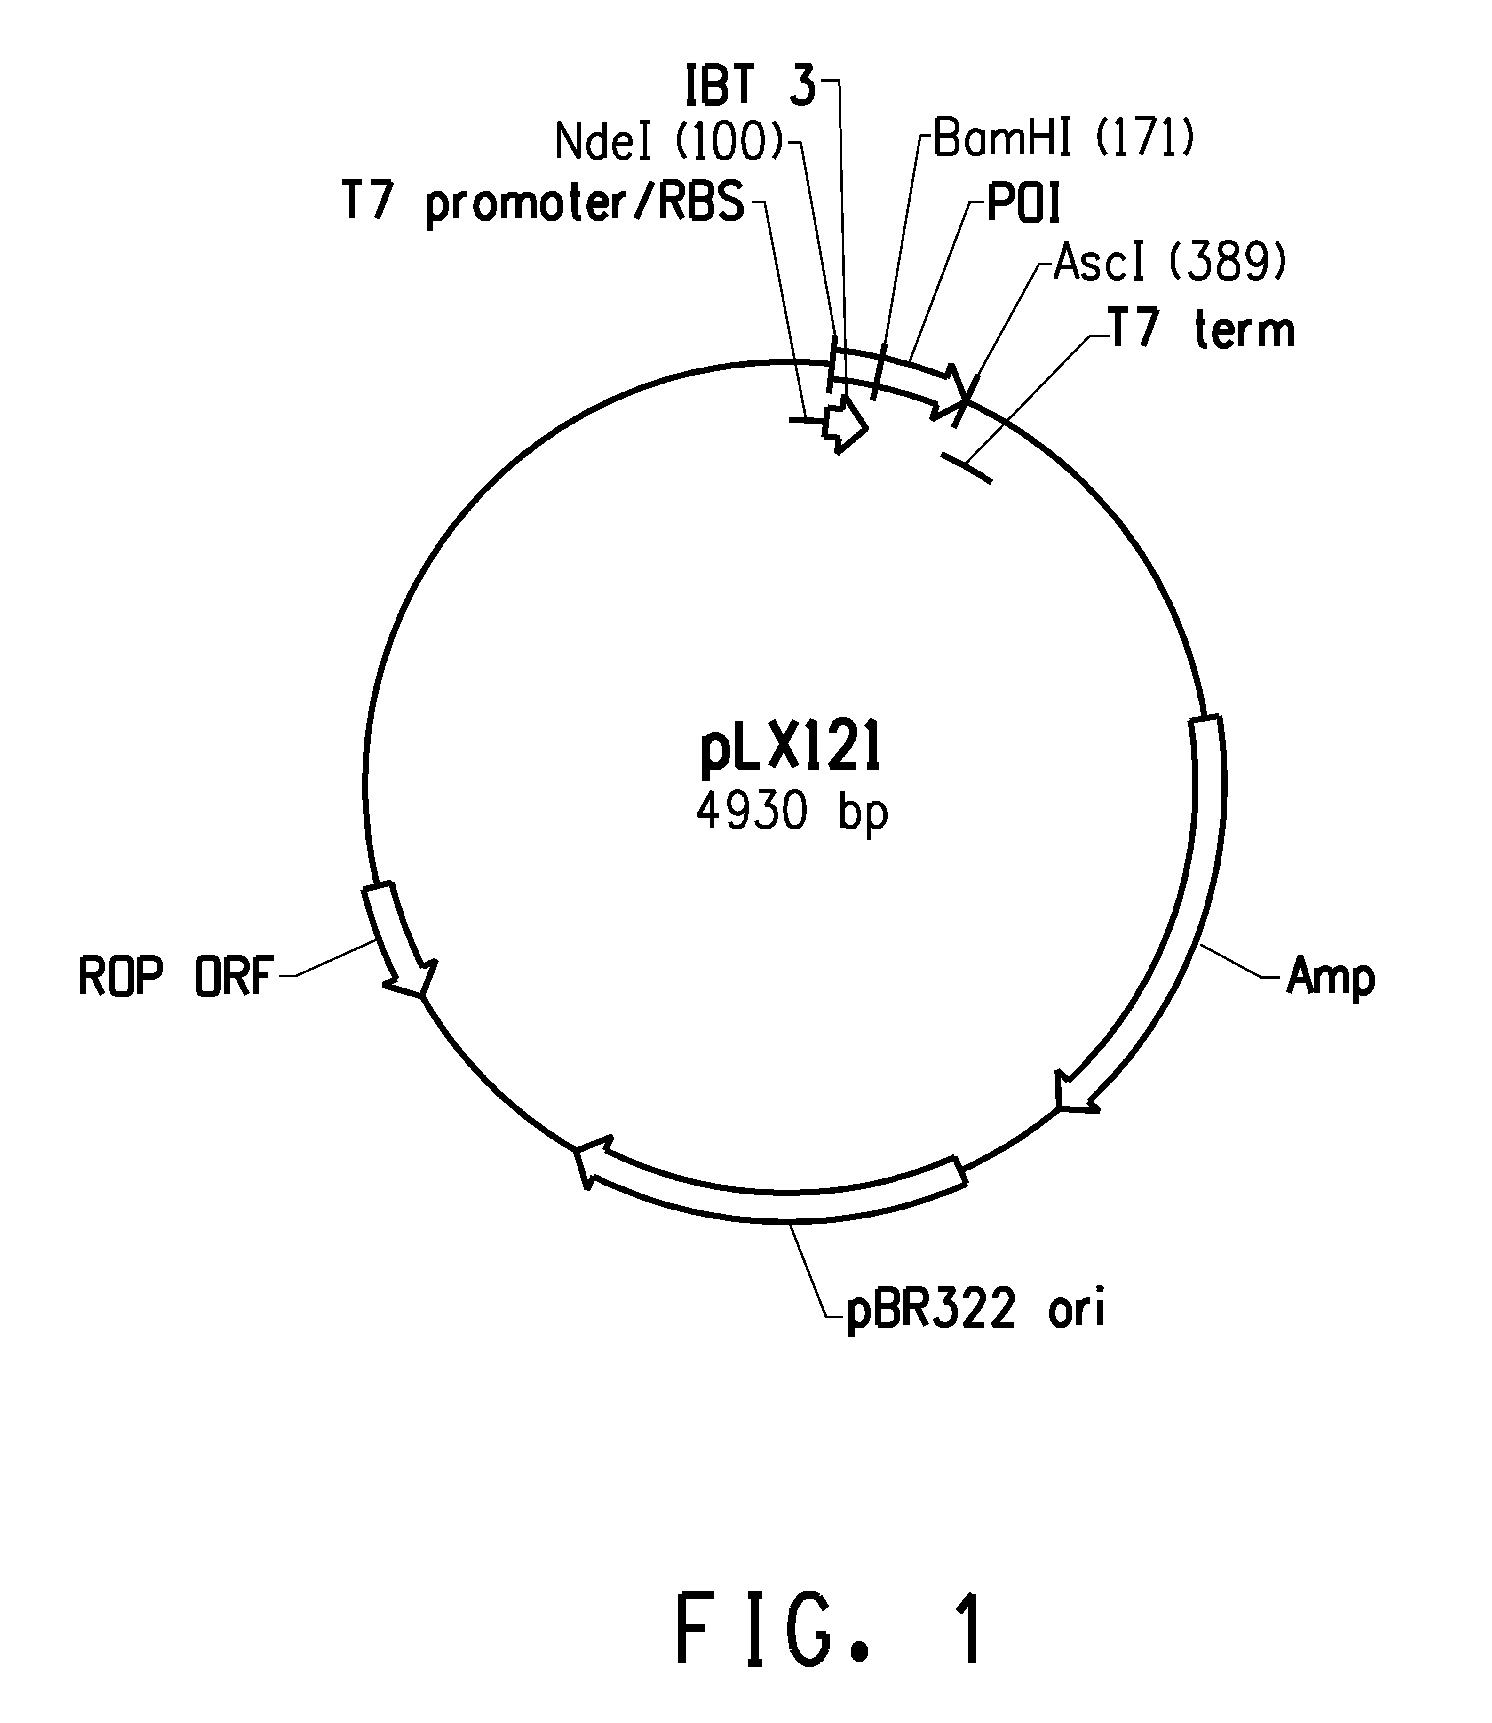 Recombinant peptide production using a cross-linkable solubility tag